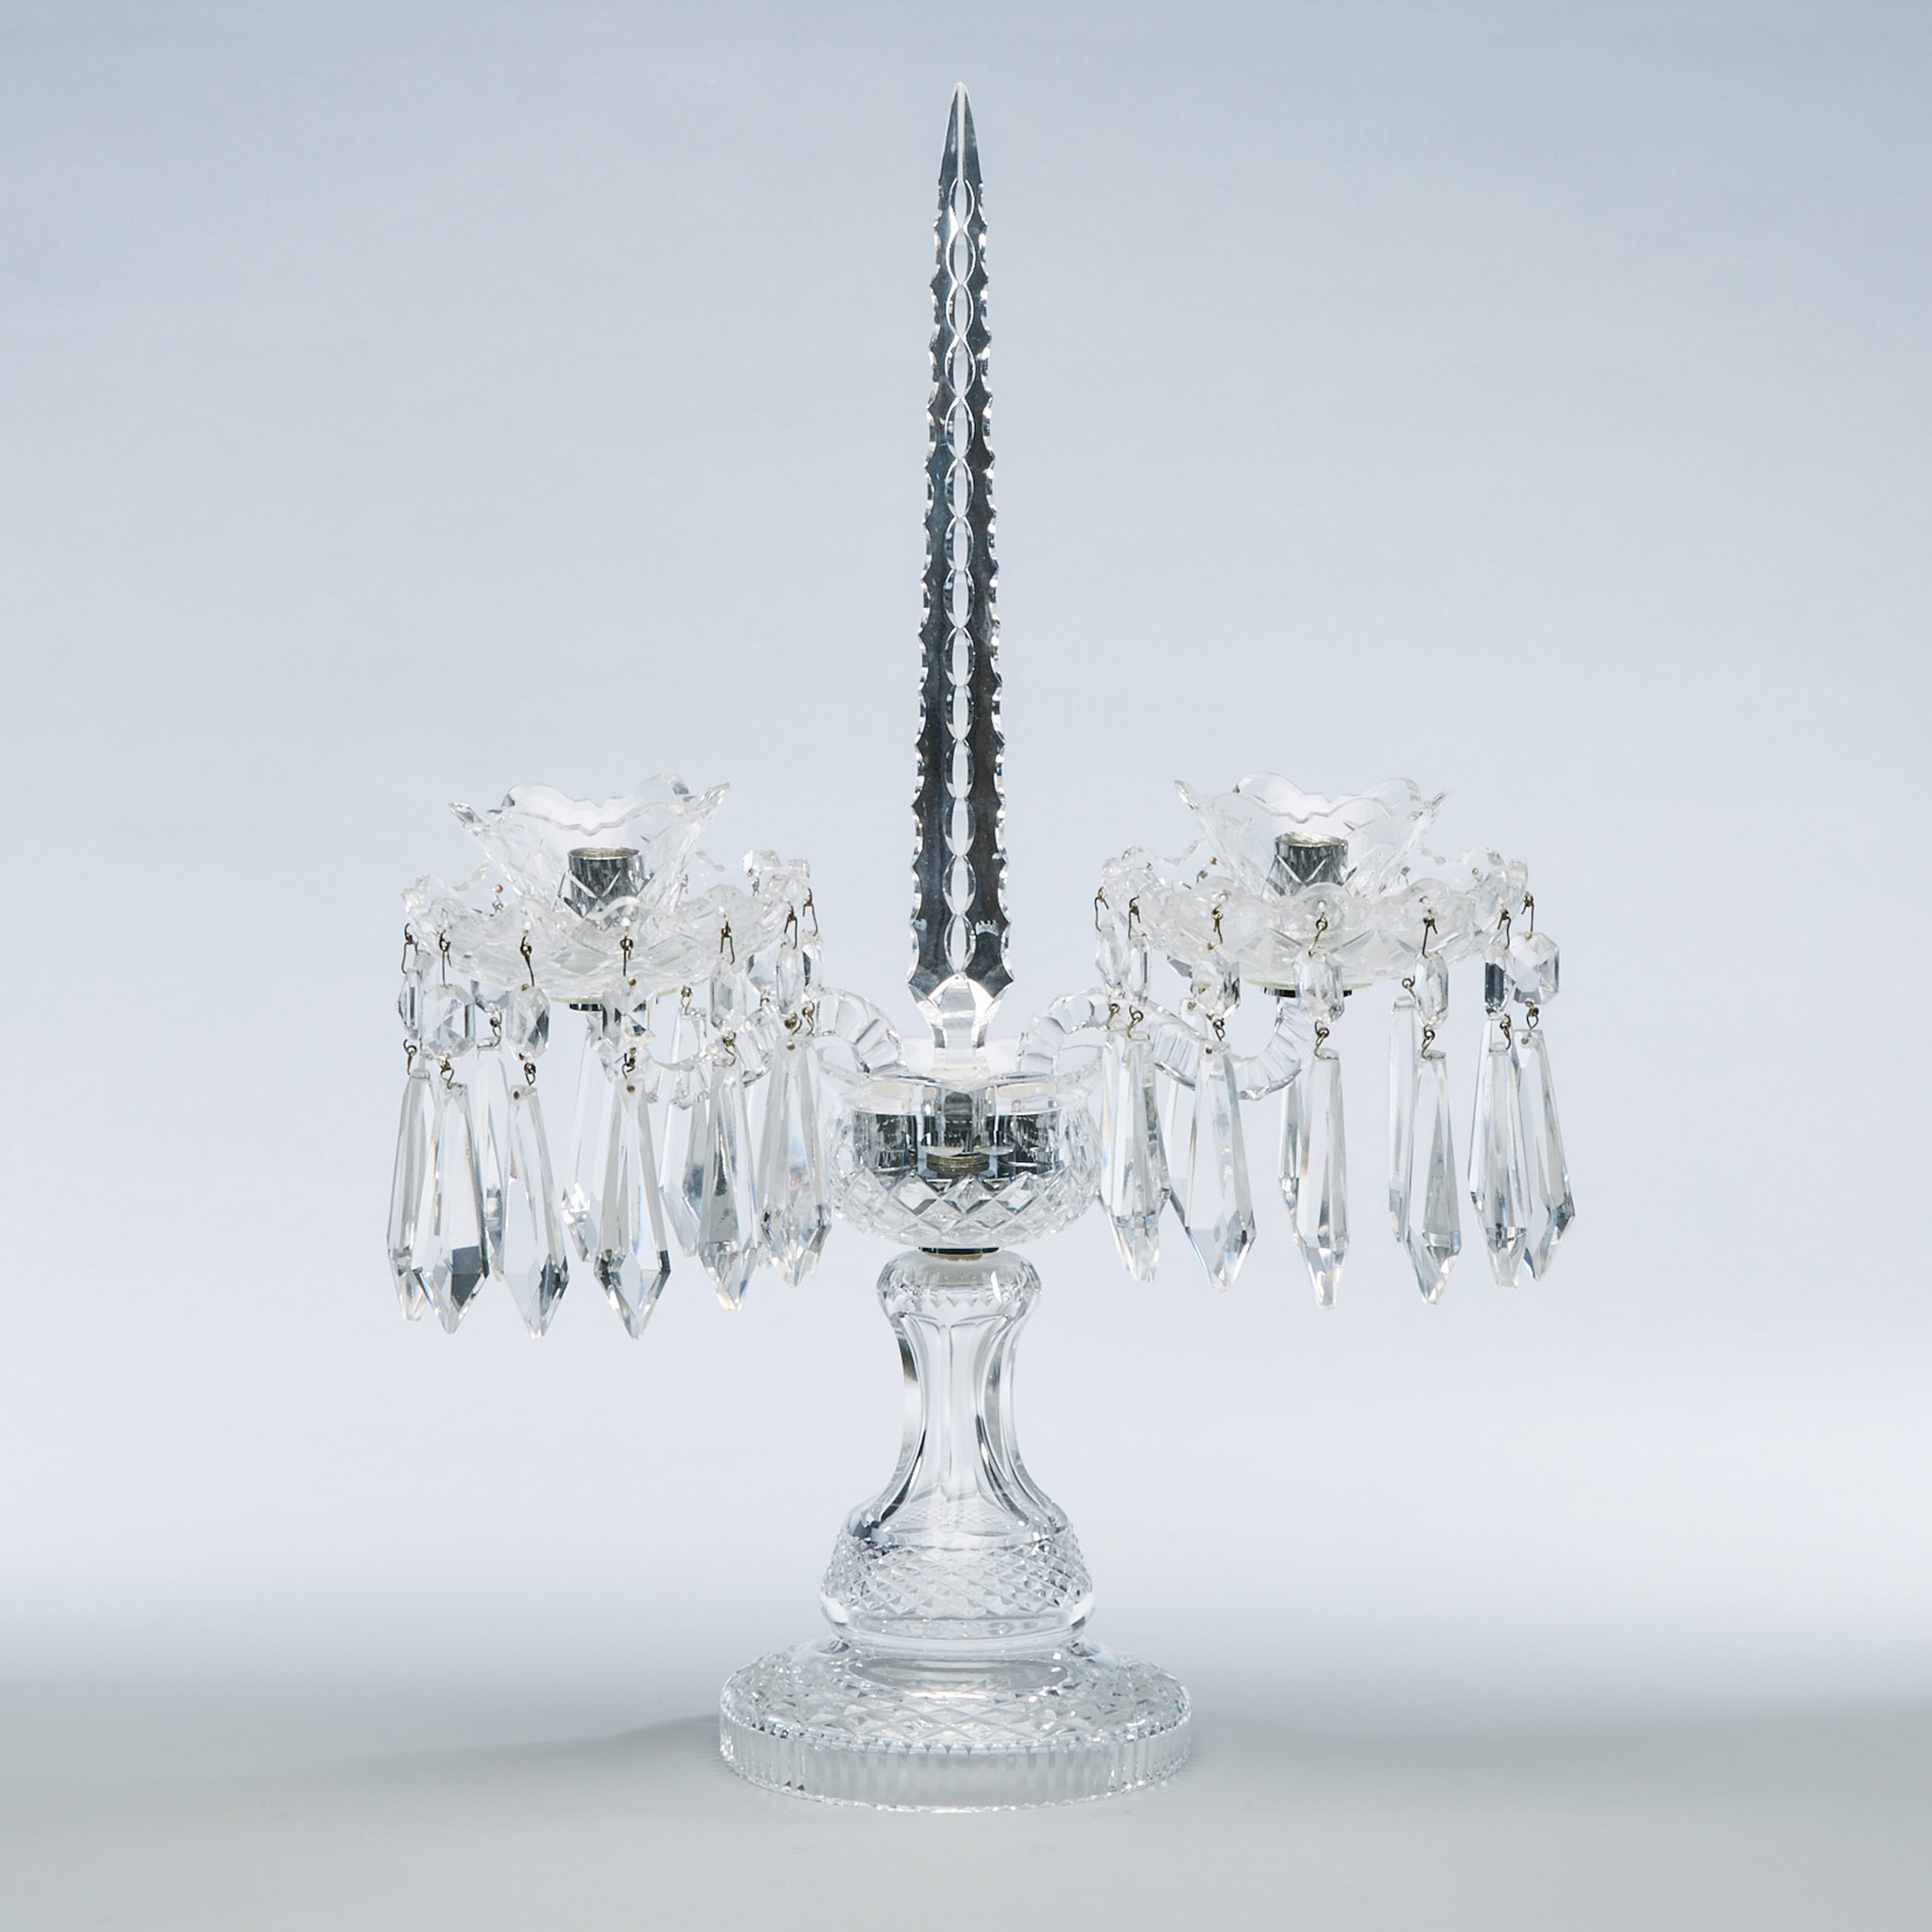 Waterford Cut Glass Two-Light Candelabrum, 20th century